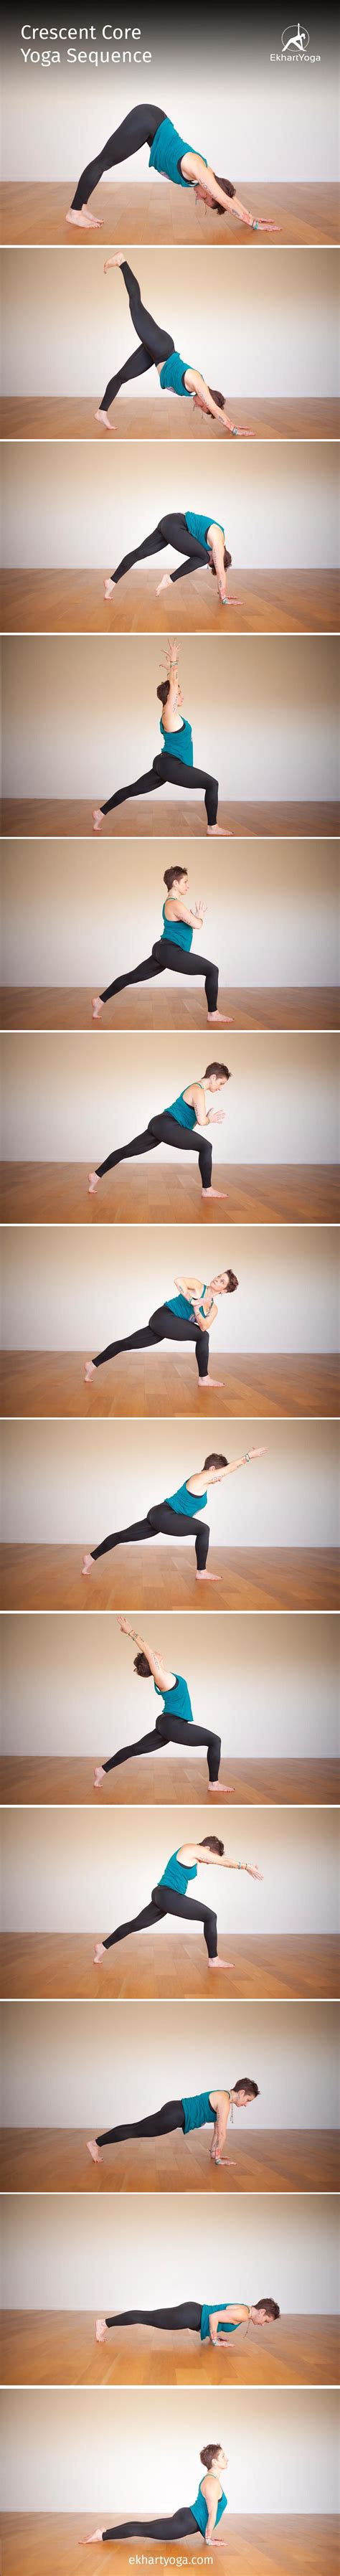 A Crescent Core Yoga Sequence To Get Your Heart Rate Going And Your